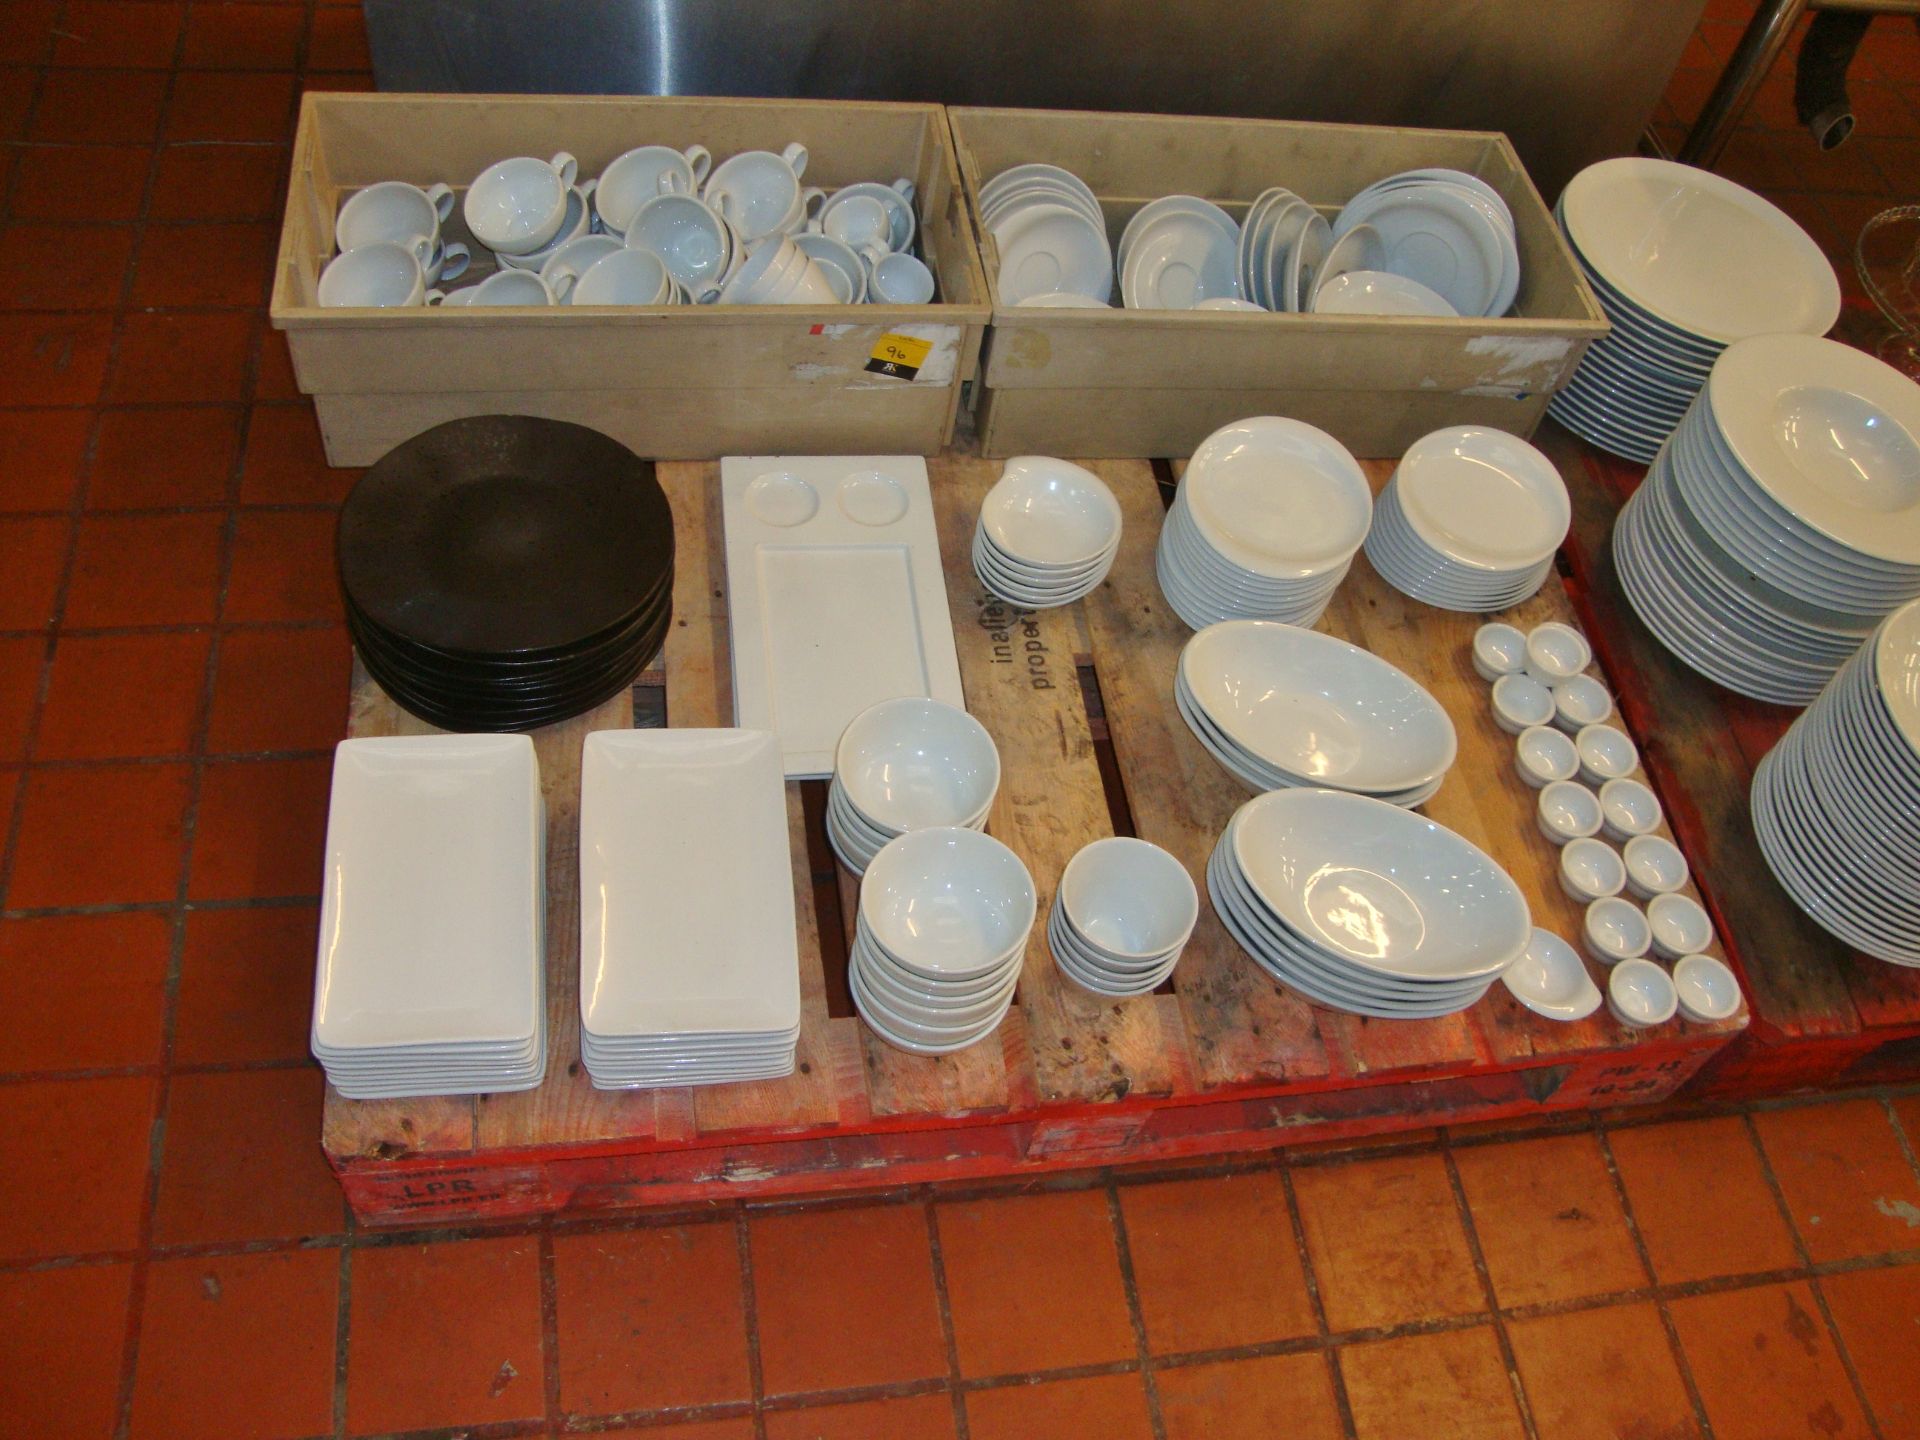 The contents of a pallet of assorted crockery, cups & saucers - beige crates excluded